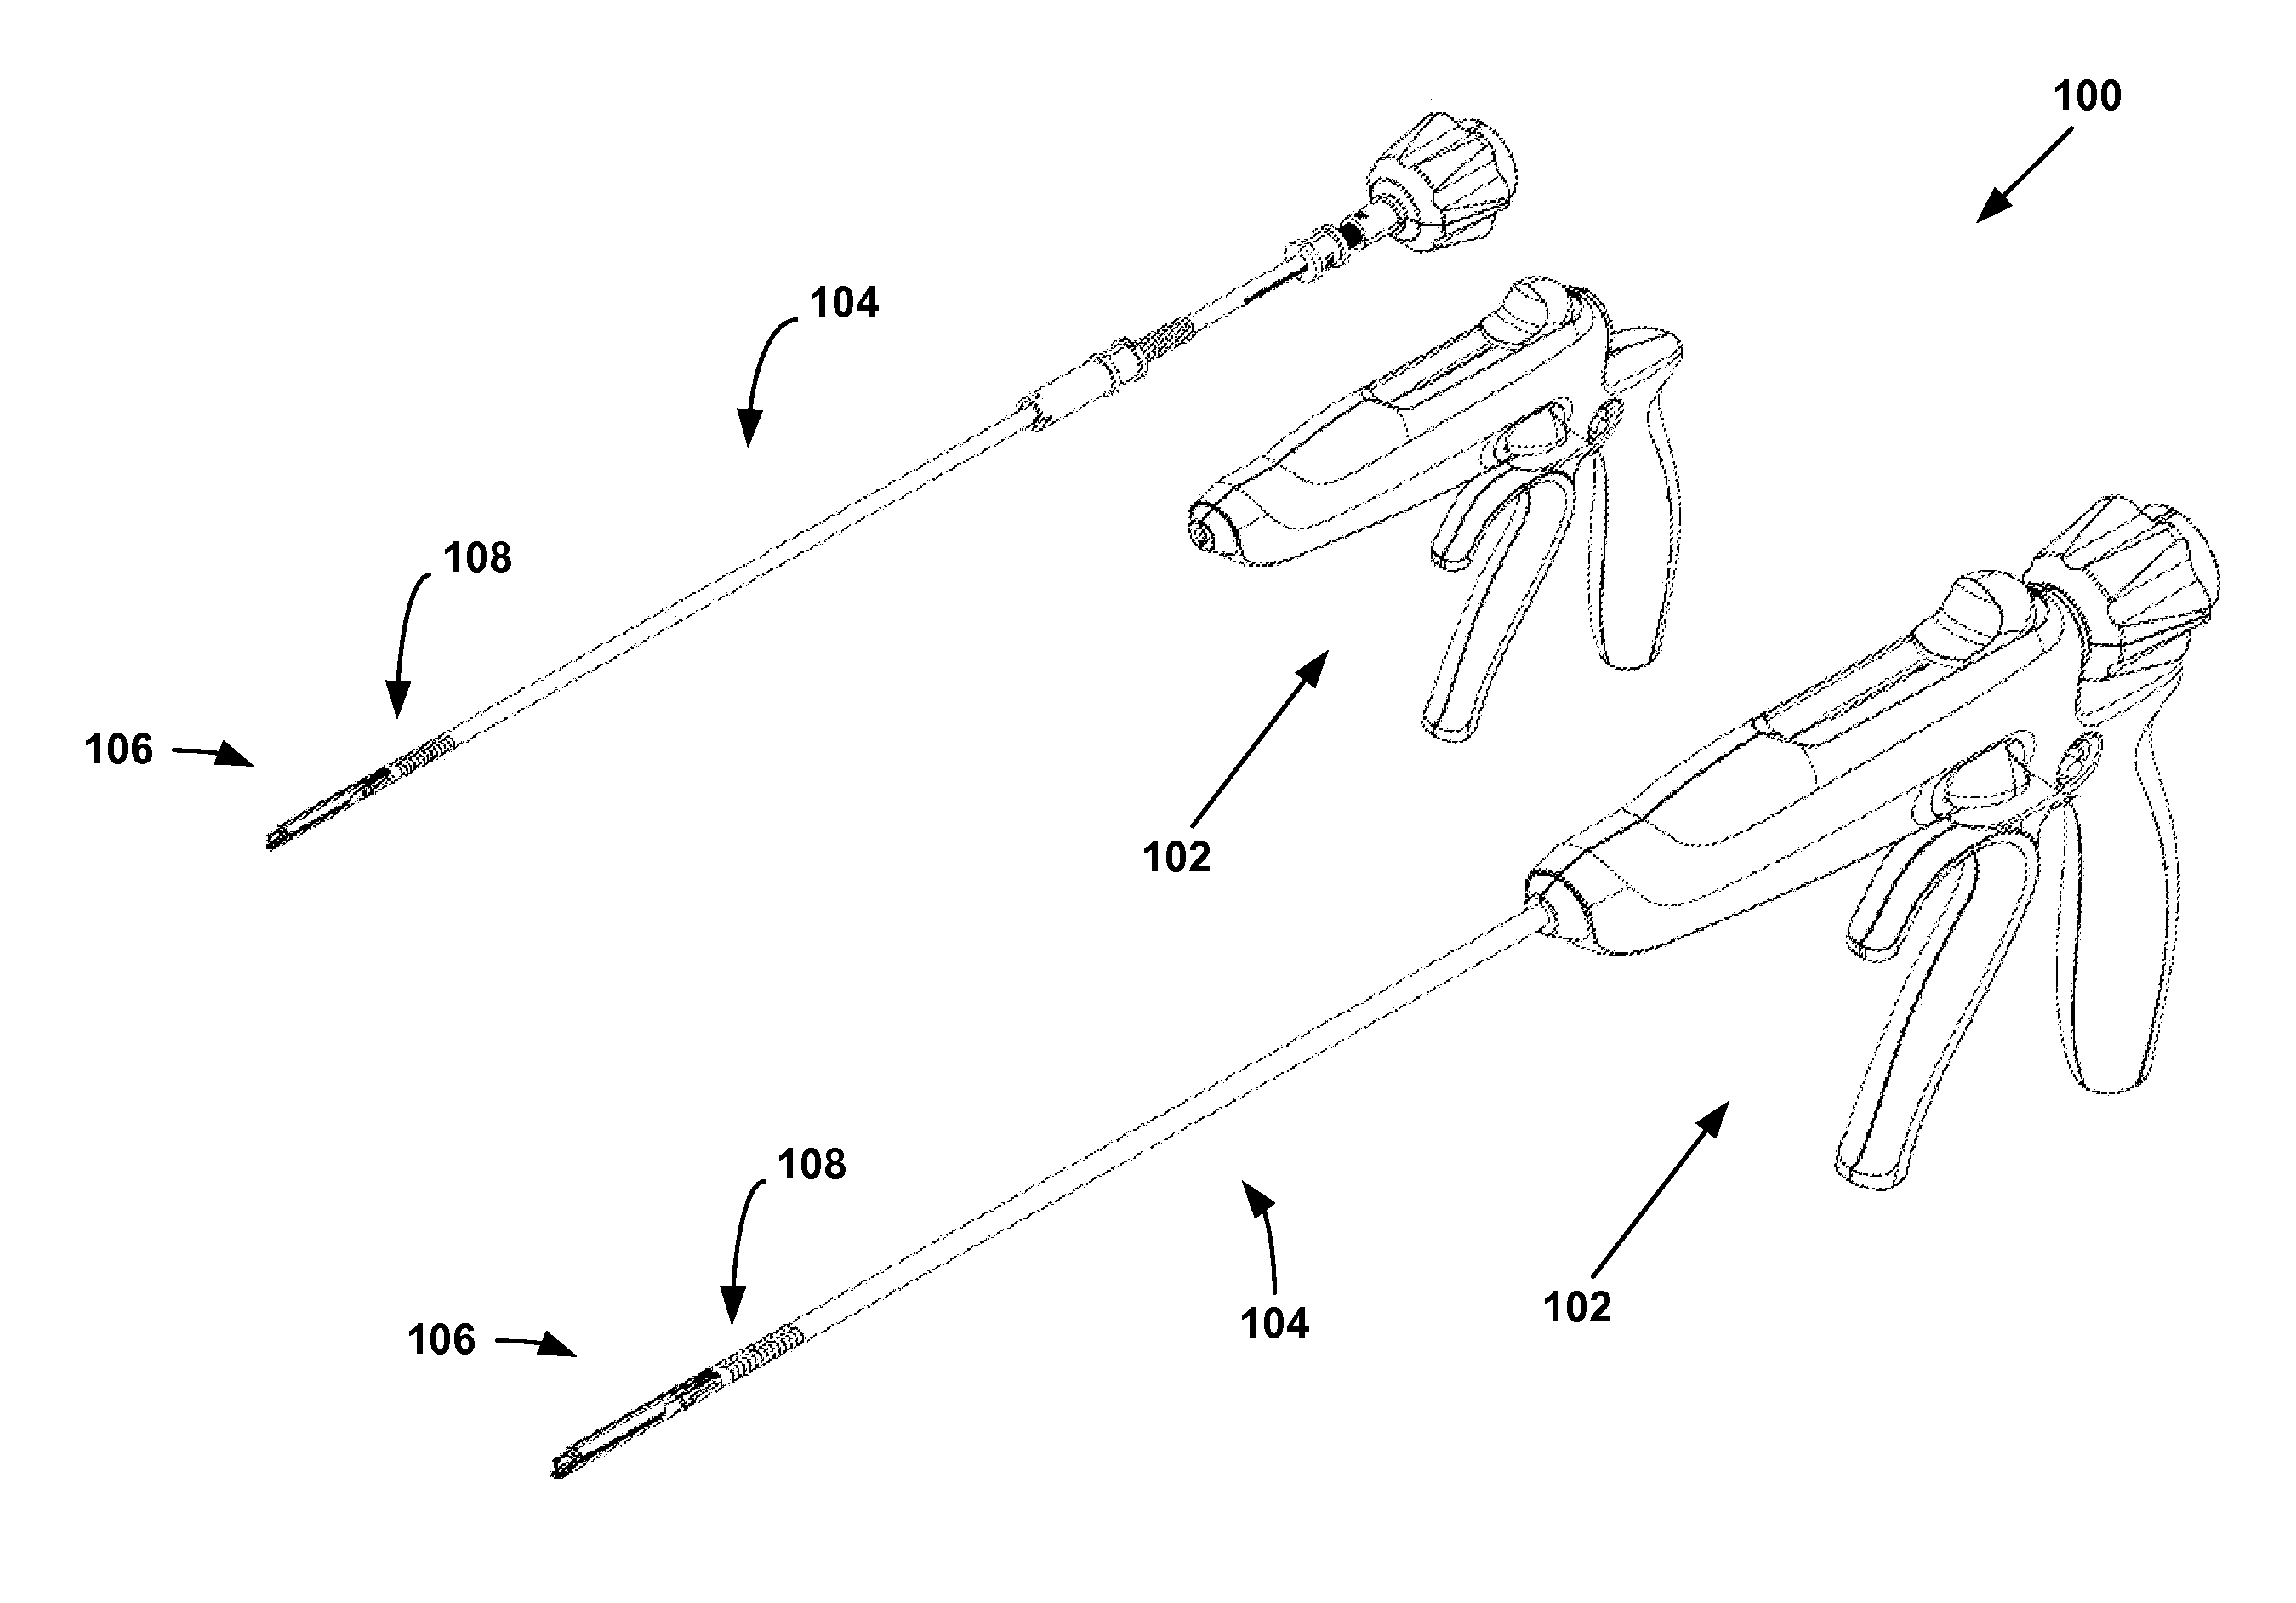 Microcutter stapling apparatus clamp and deploy mechanisms systems and methods